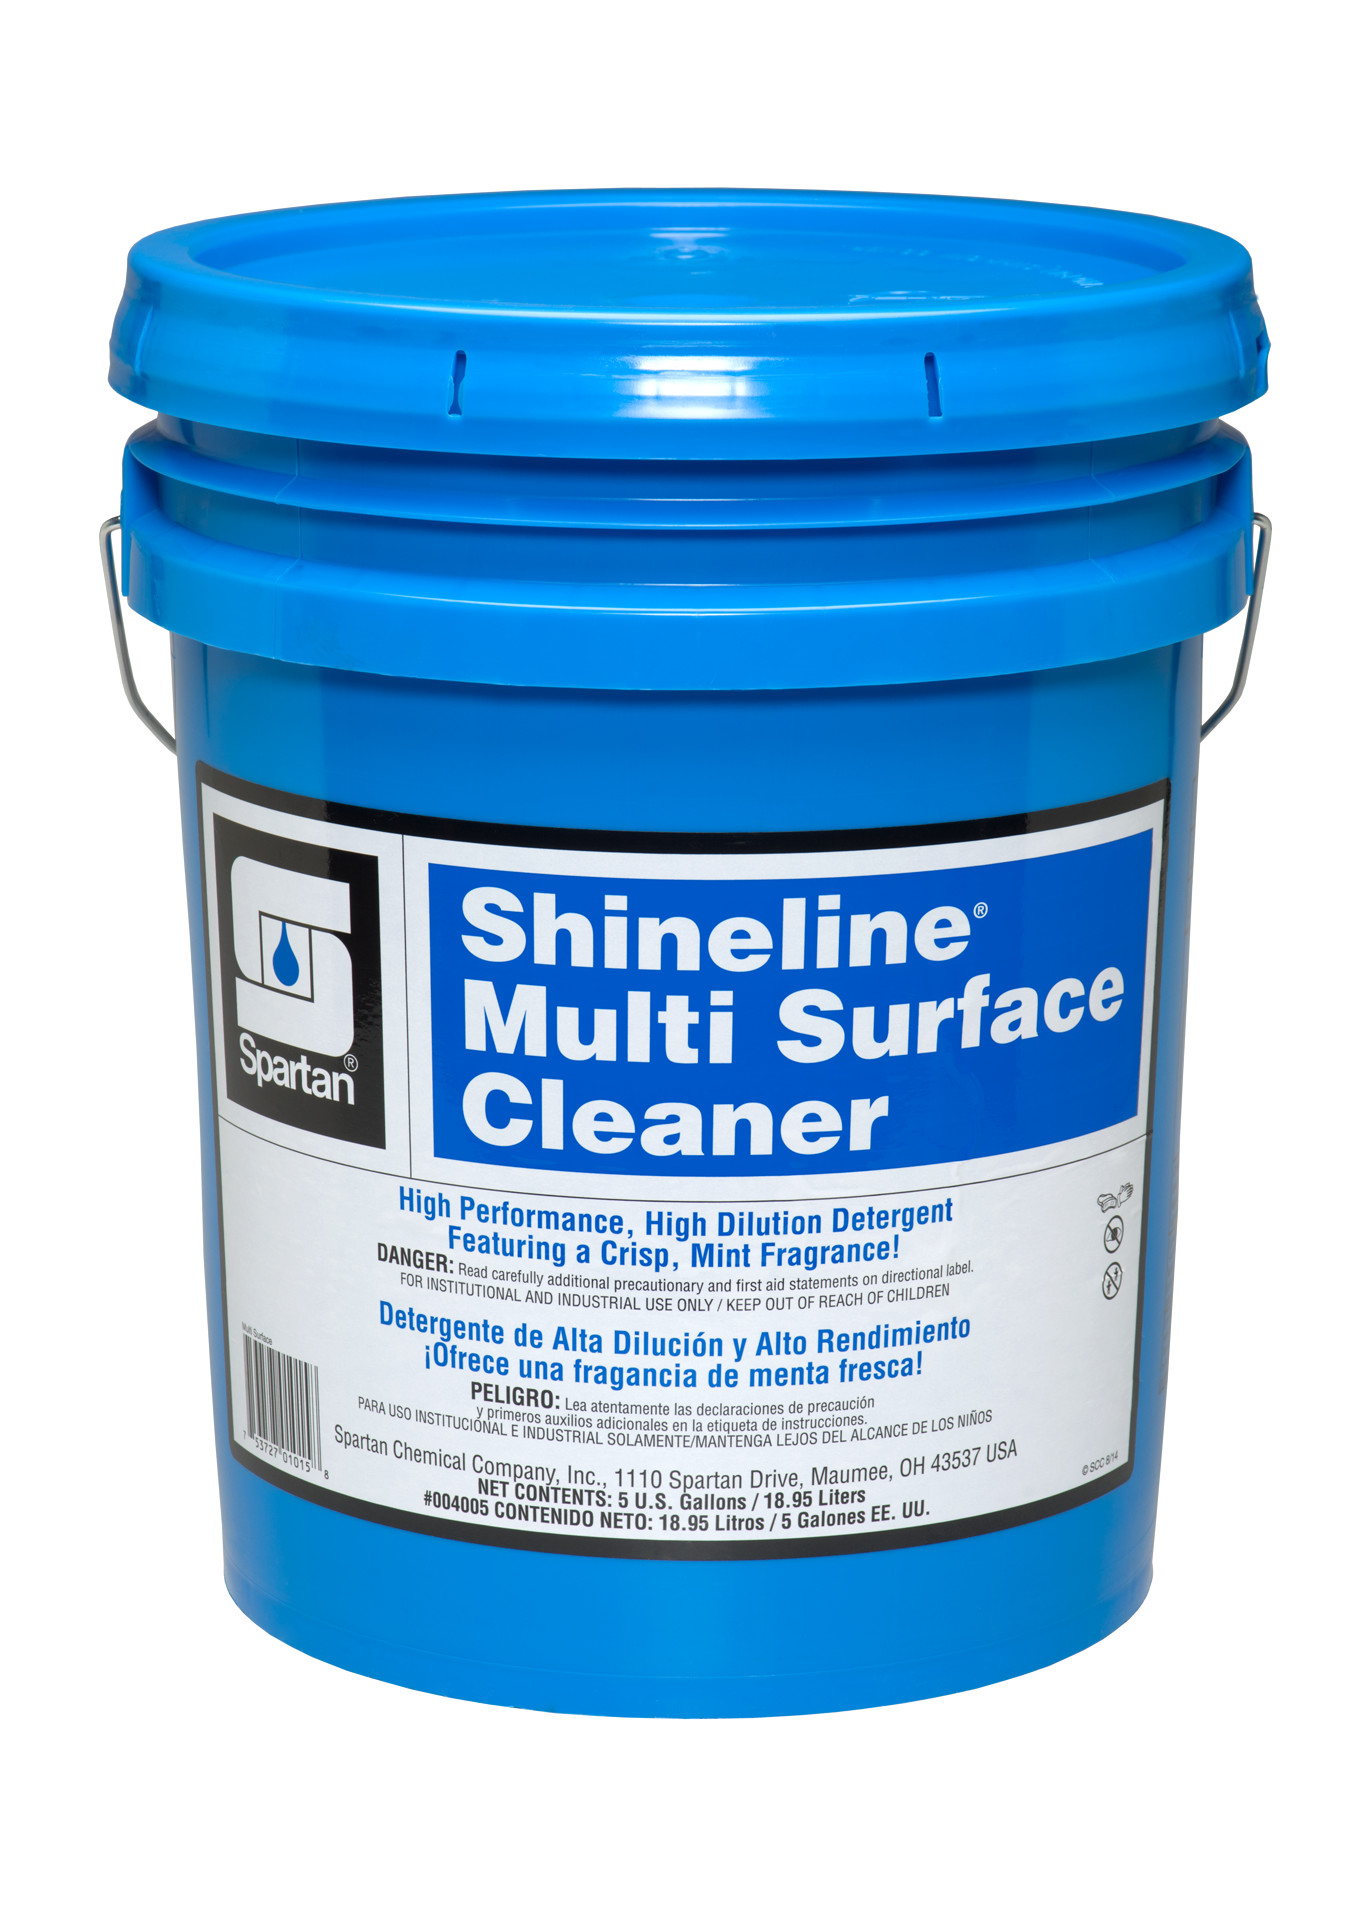 Spartan Chemical Company Shineline Multi Surface Cleaner, 5 GAL PAIL